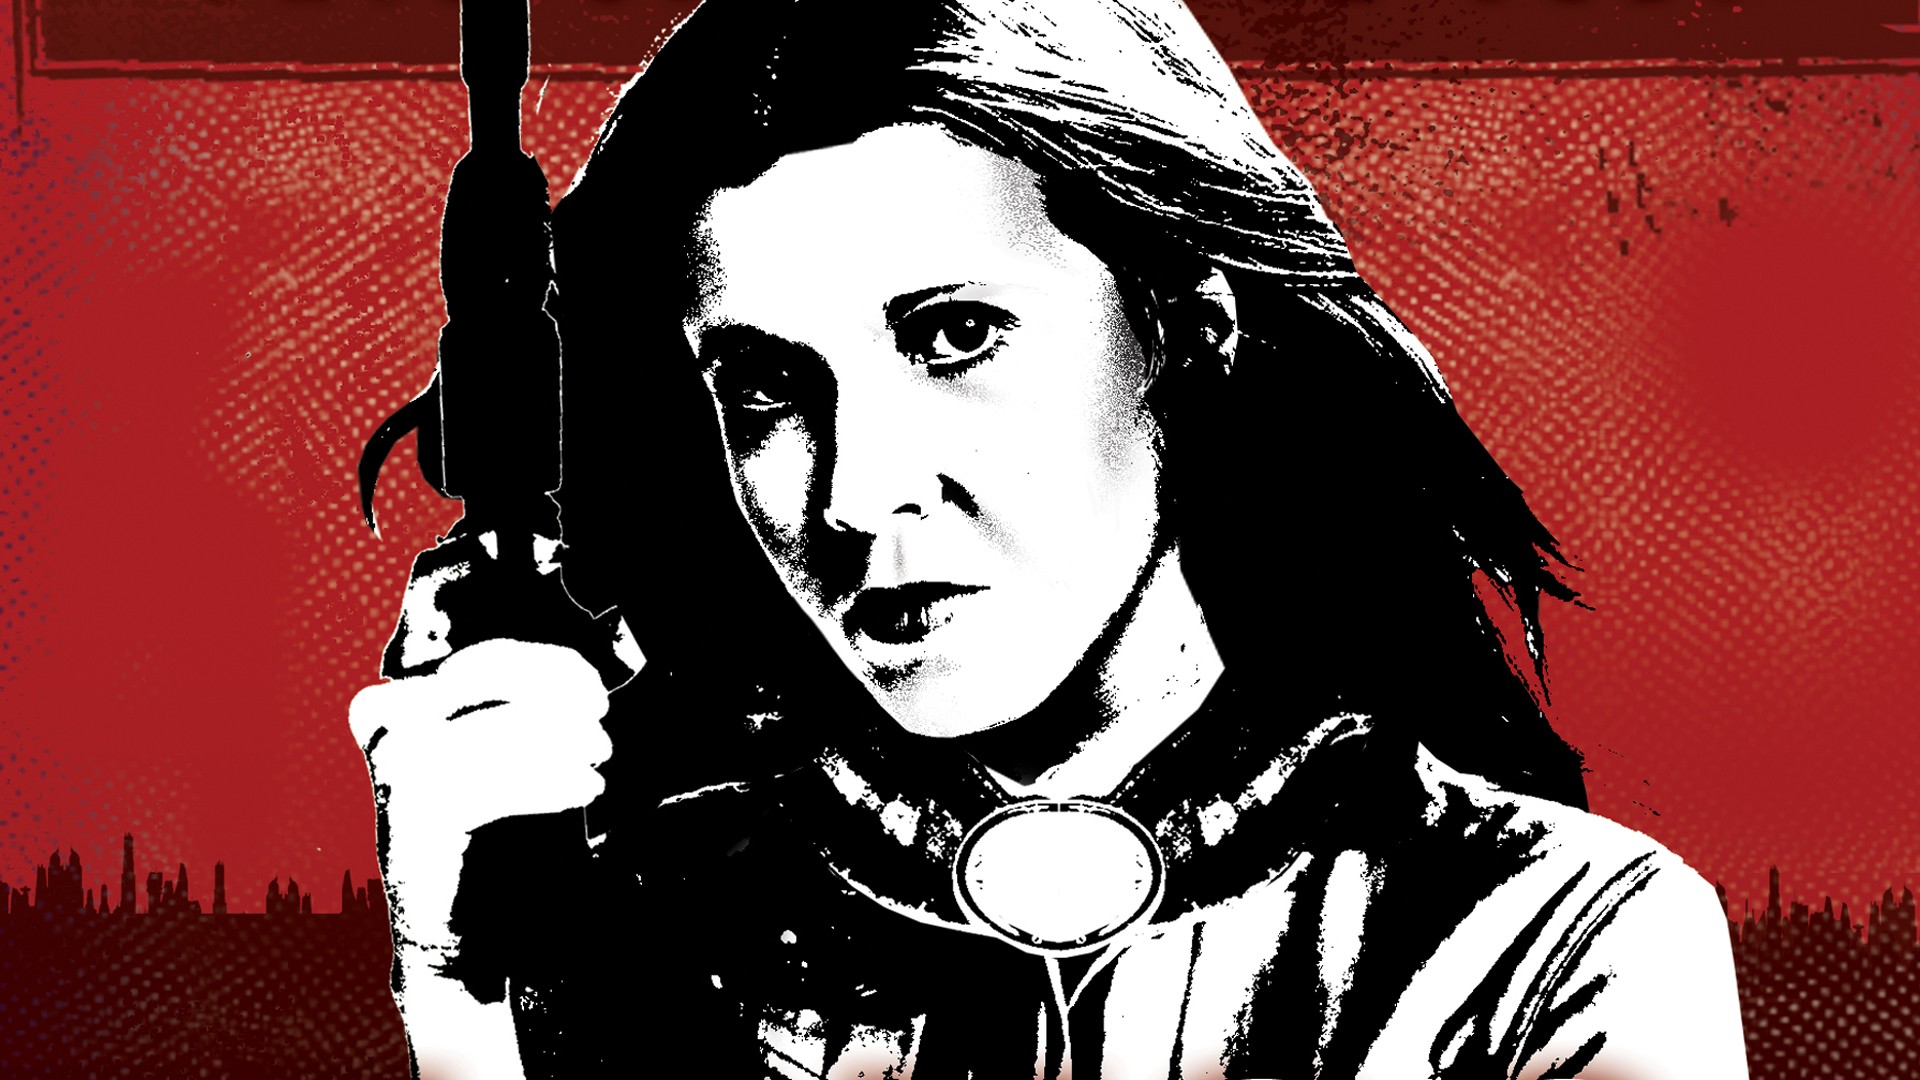 Movies Star Wars Leia Organa Carrie Fisher Deceased 1920x1080